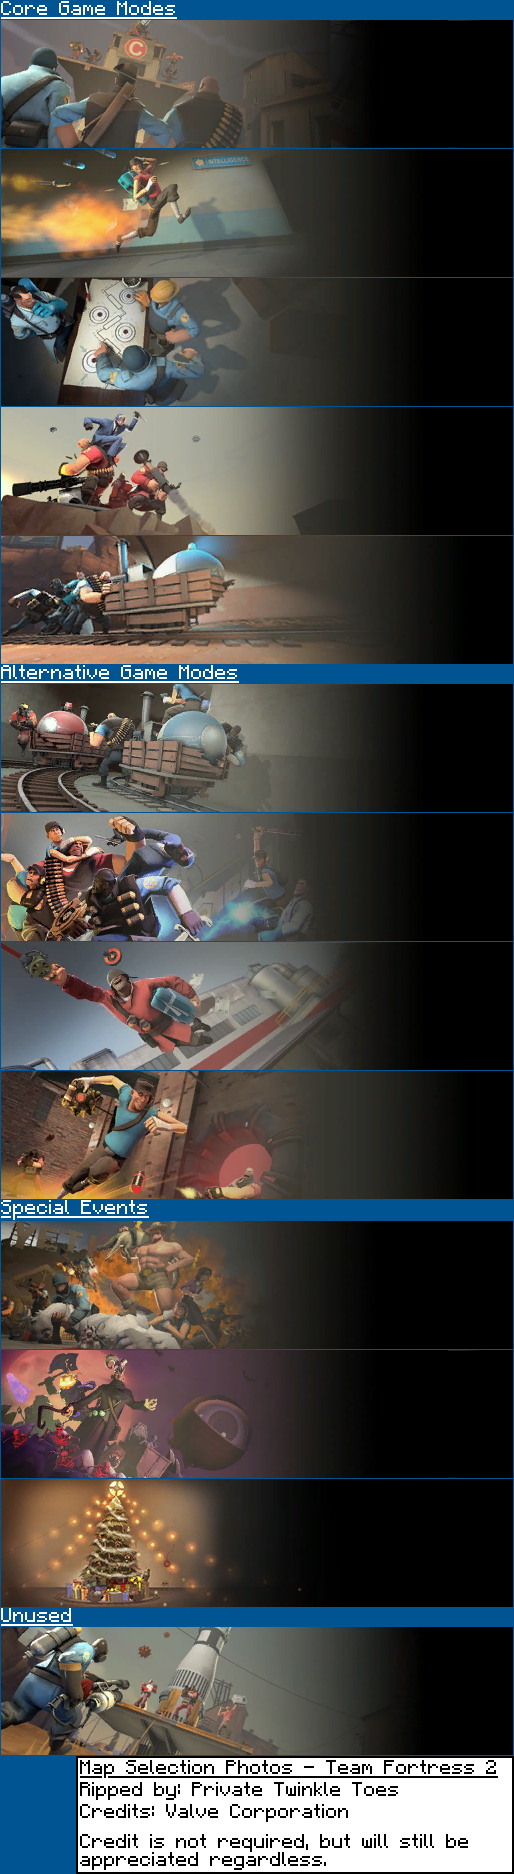 Team Fortress 2 - Map Selection Photos